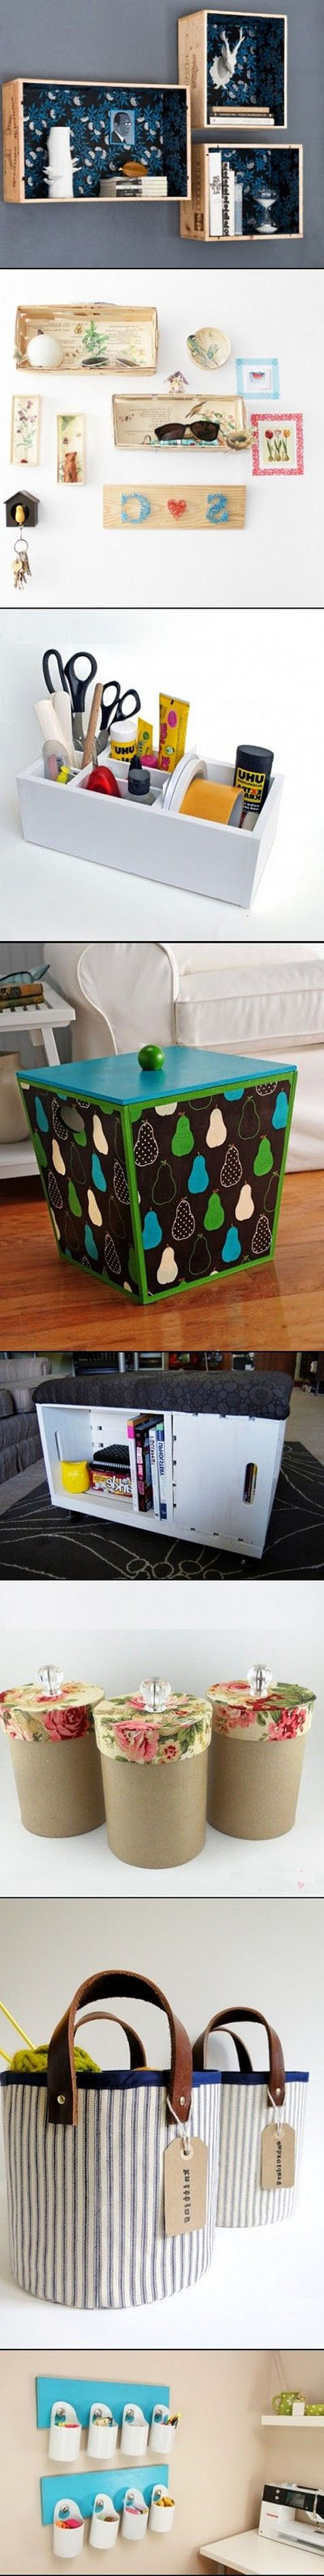 18  DIY Storage Furniture, Containers And Boxes7624e2512f